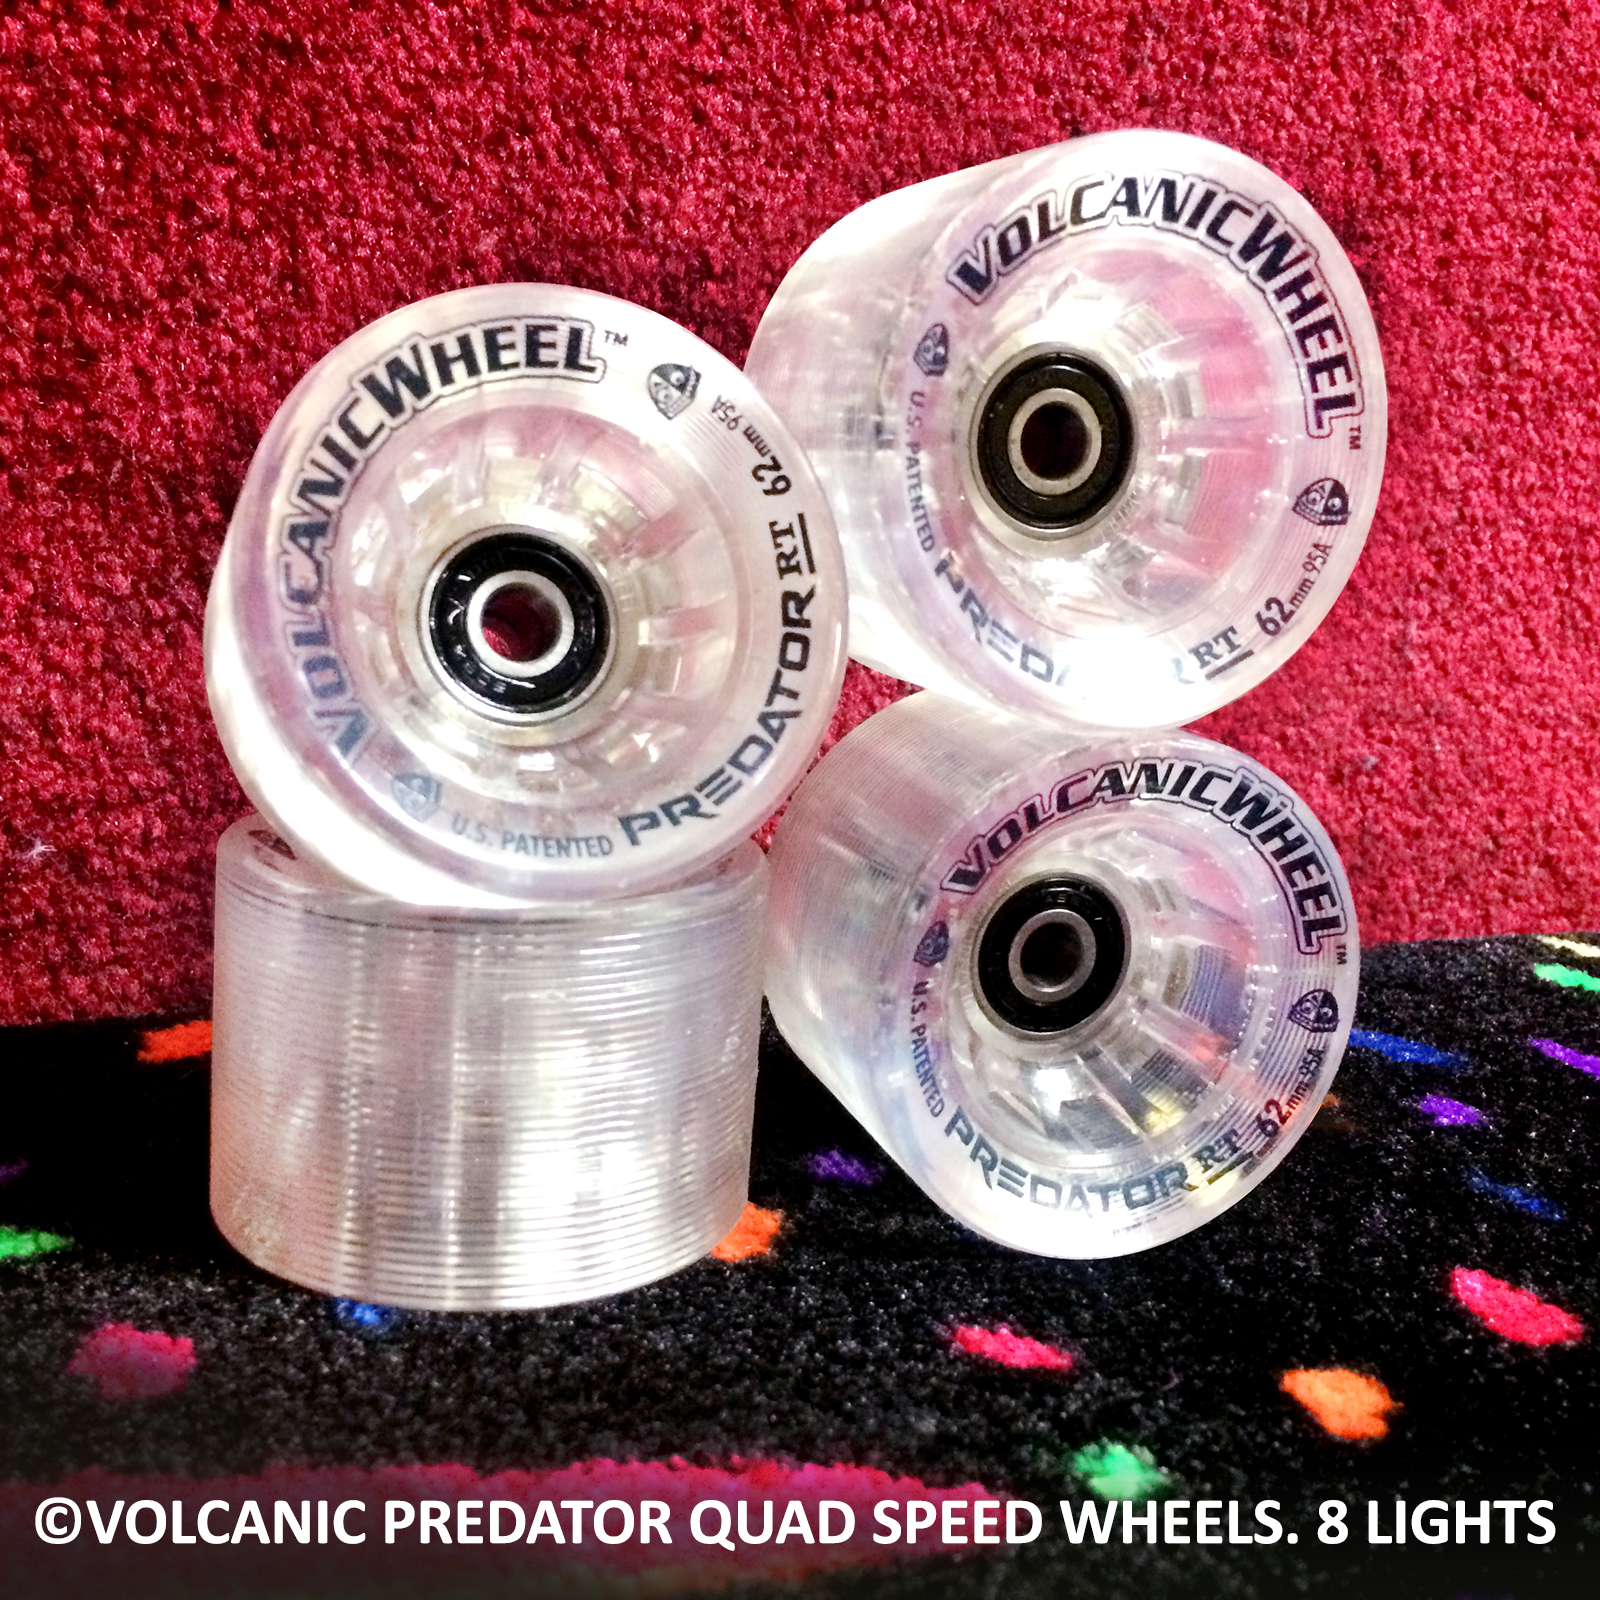 LED Light Up 32mm x 58mm ABEC-9 608 Bearings 82A 4 Pack Wheels for Quad Skating and Skateboarding No Batteries Required Roller Skate Wheels Quad Light 